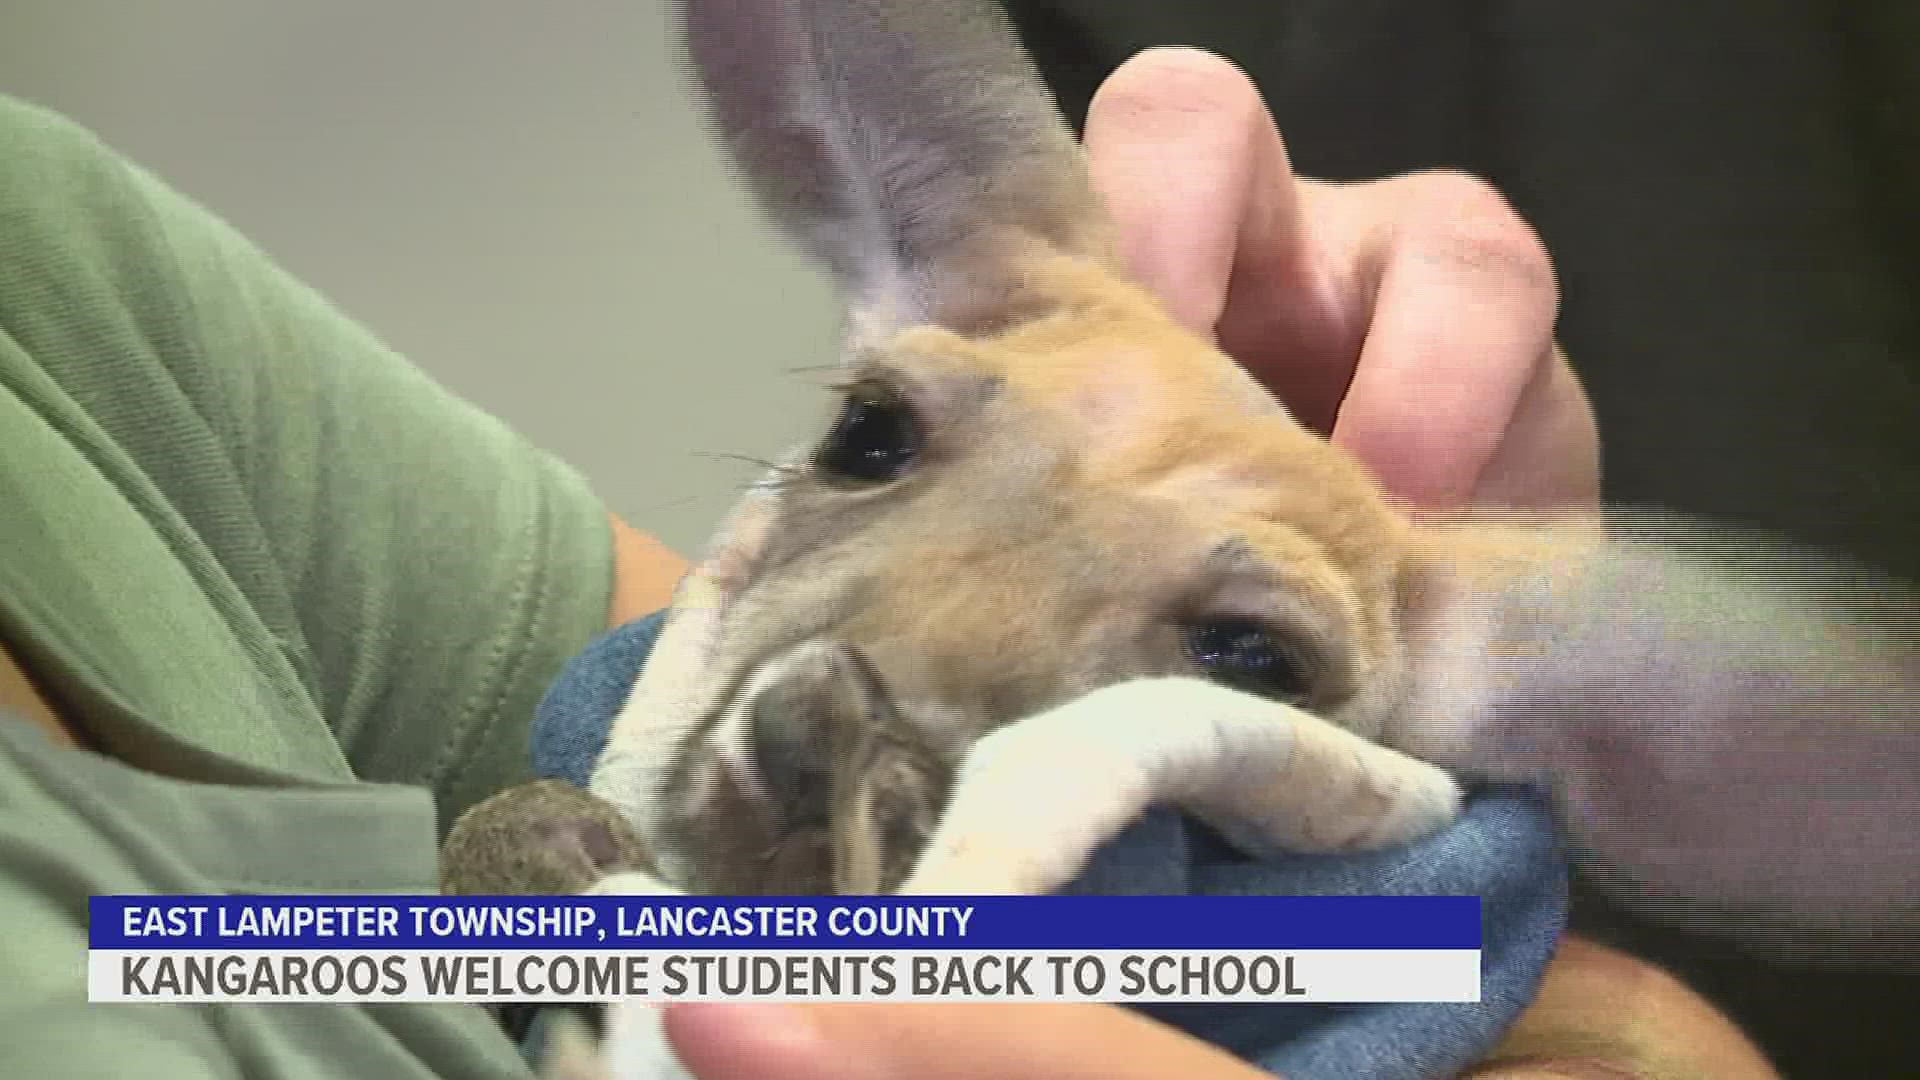 Two joeys from Aldinger Farms in Dauphin County visited with students Monday in order to reduce anxiety for the new semester.